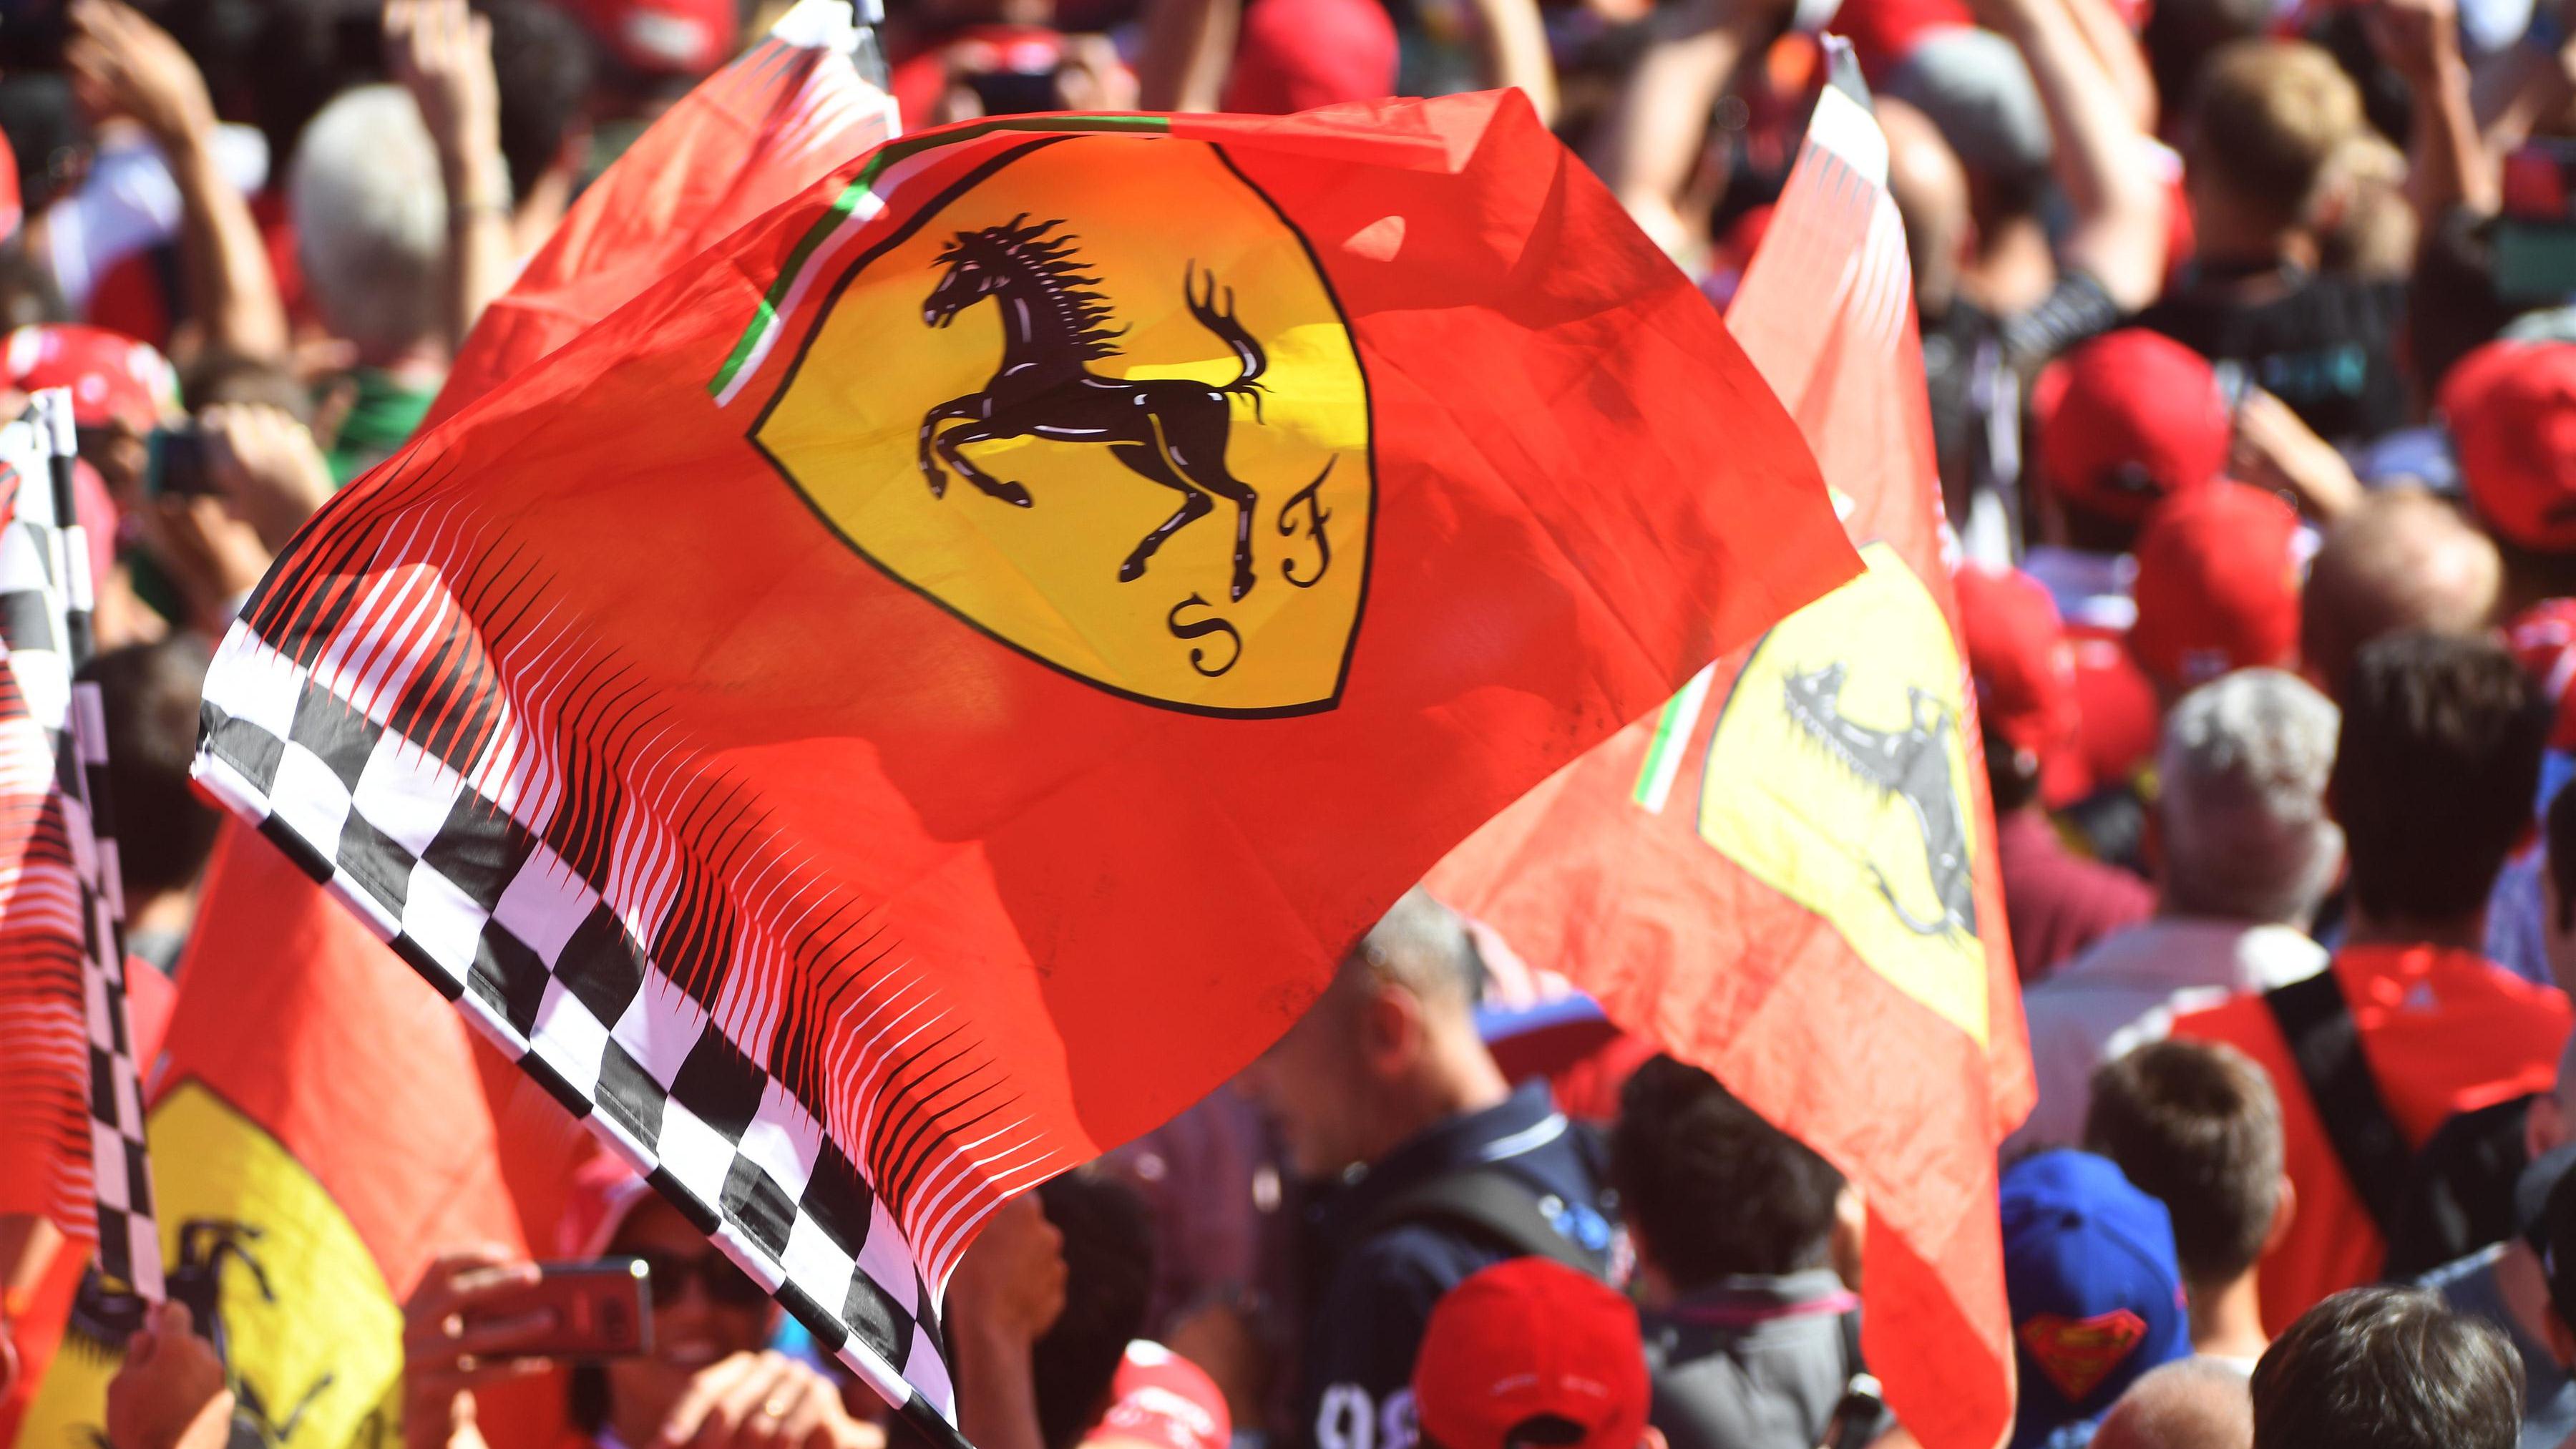 The Tifosi in full voice and Herta's F1 chances – 5 storylines we're  excited about ahead of the 2022 Italian Grand Prix | Formula 1®